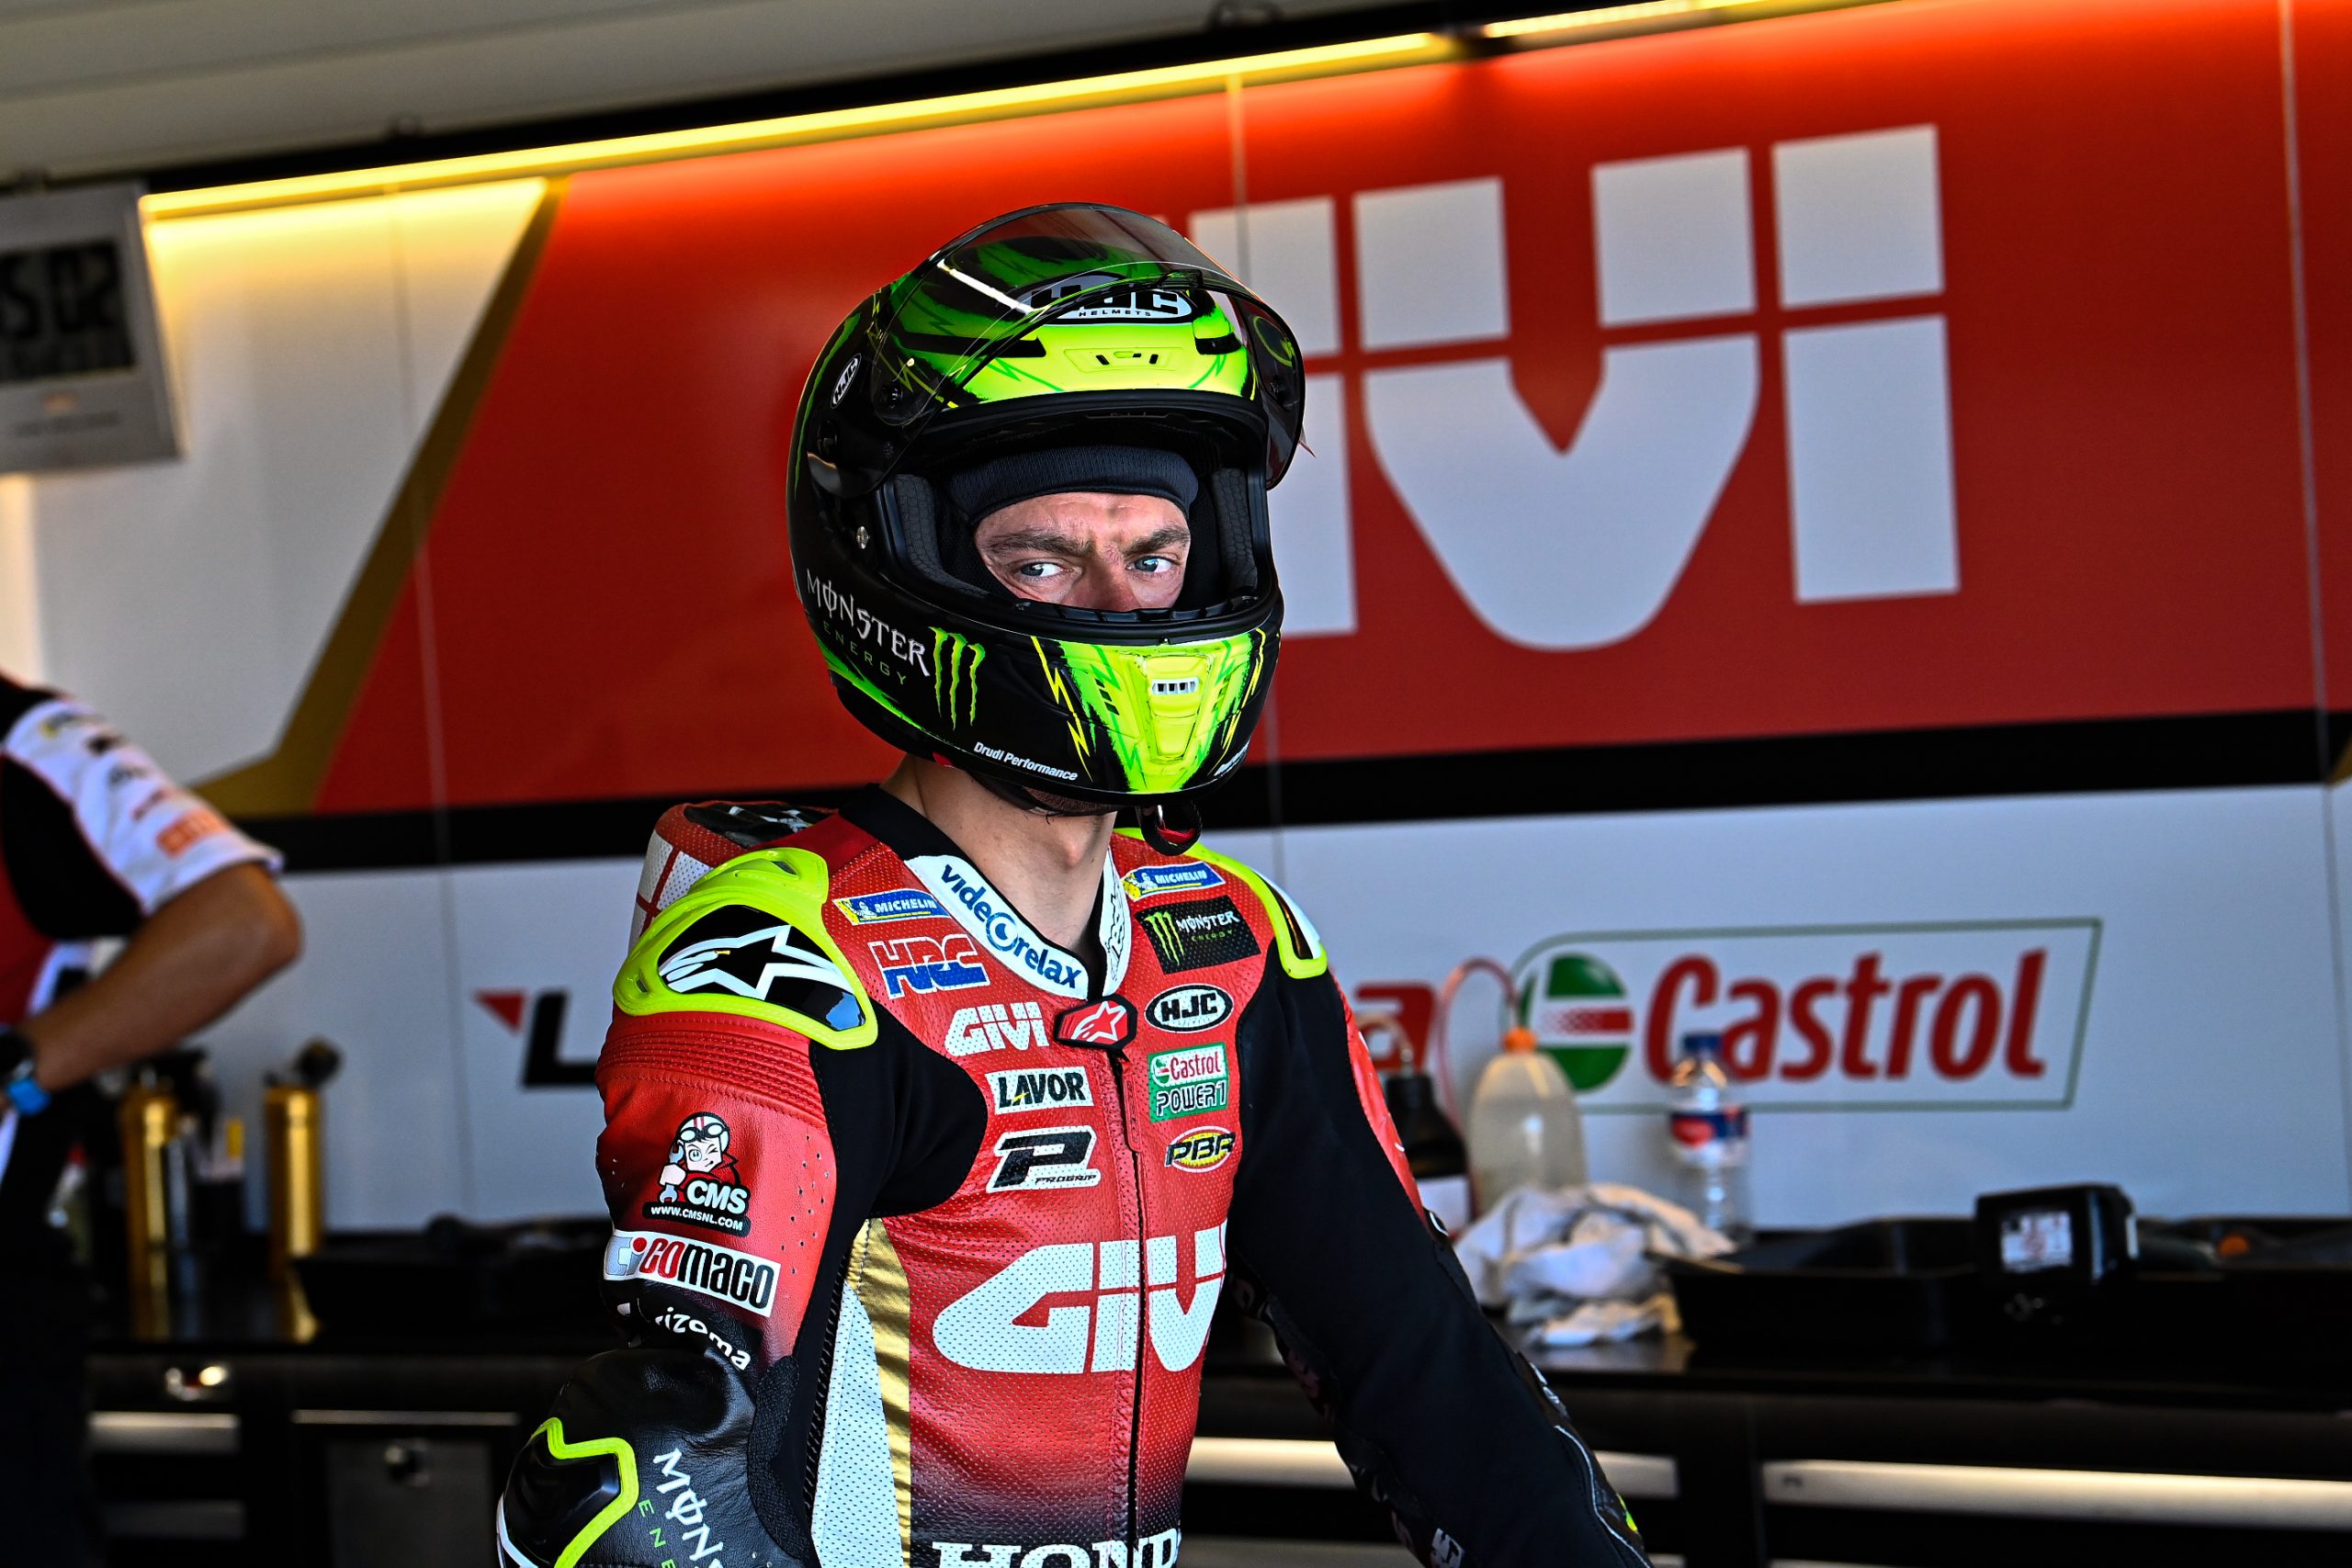 Crutchlow forced to withdraw from Spanish GP